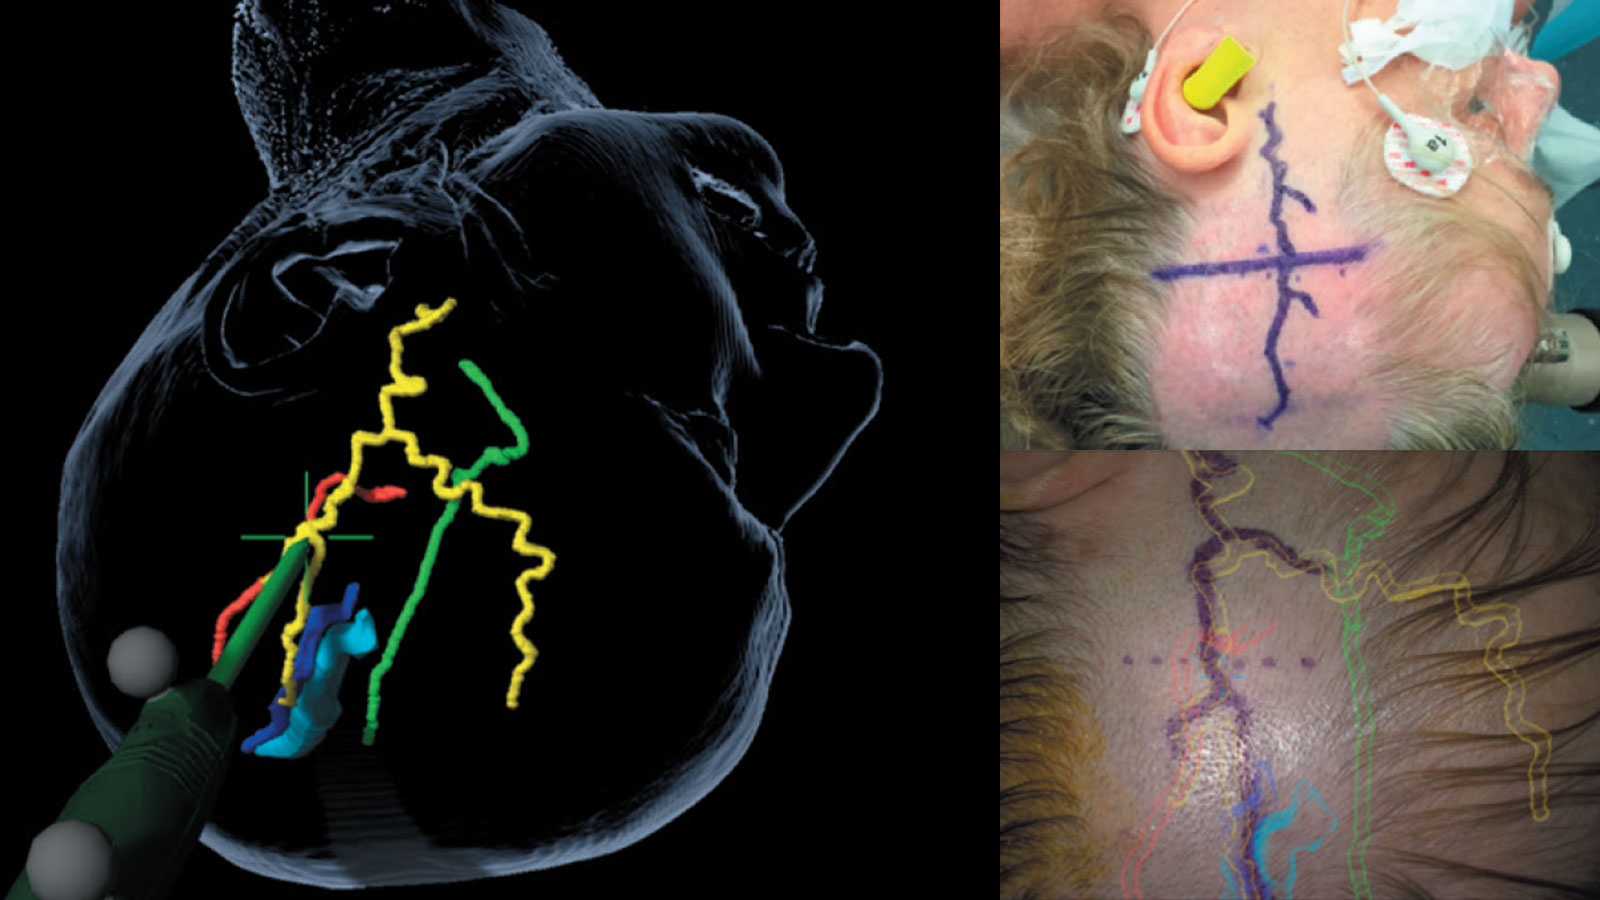 Augmented reality illustration. On the left, computer calculation of the artery; on the top right, artery drawn on scalp; on the bottom right, navigation data projected onto head.